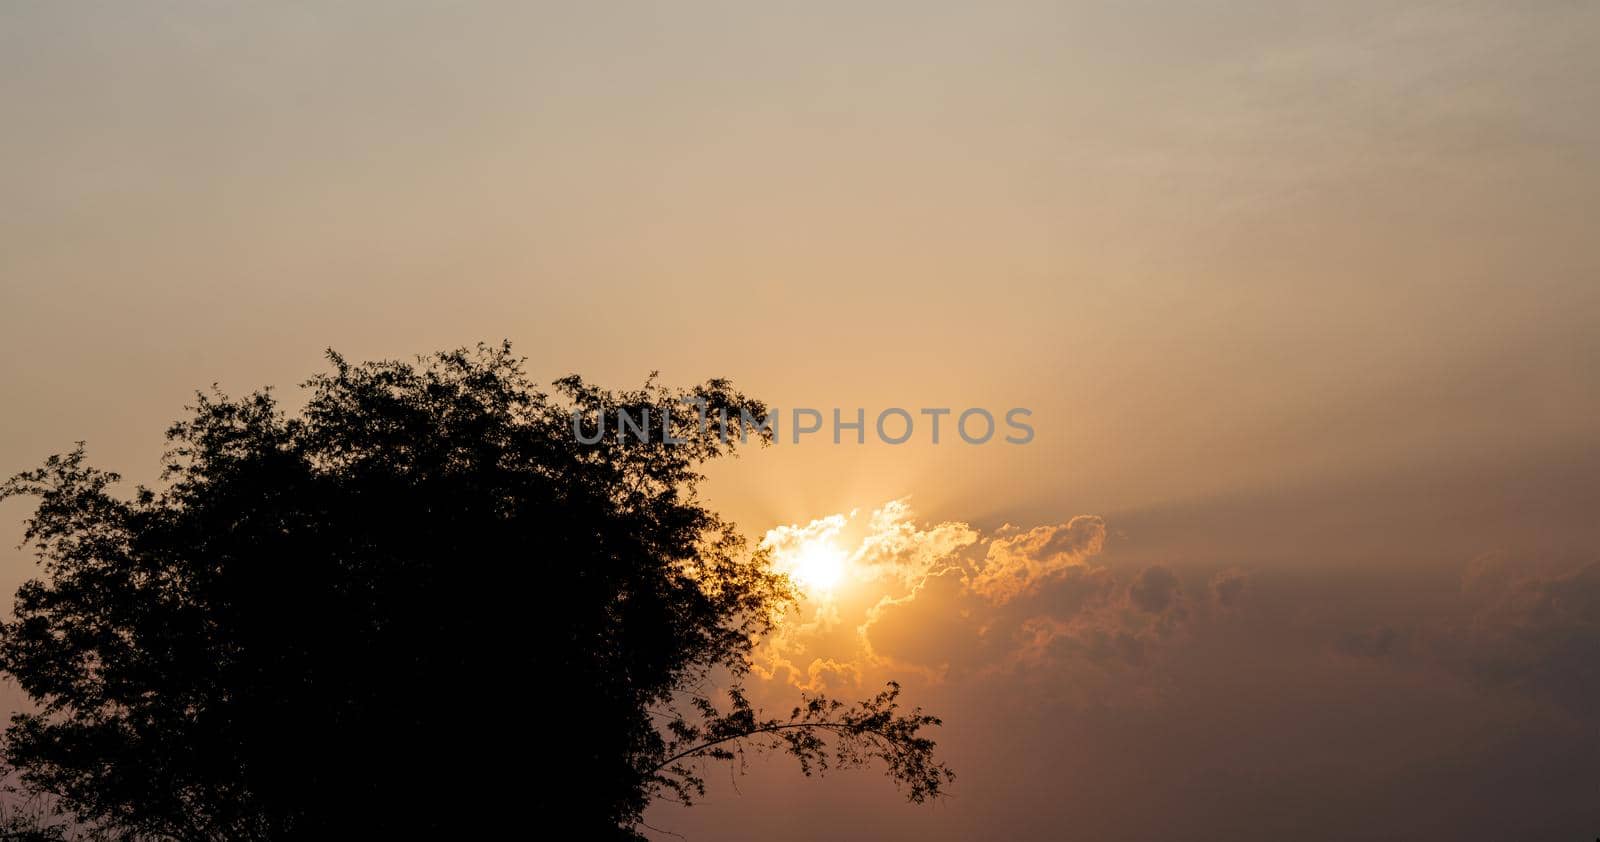 Abstract scenery sunset with silhouette of trees for nature background by Buttus_casso